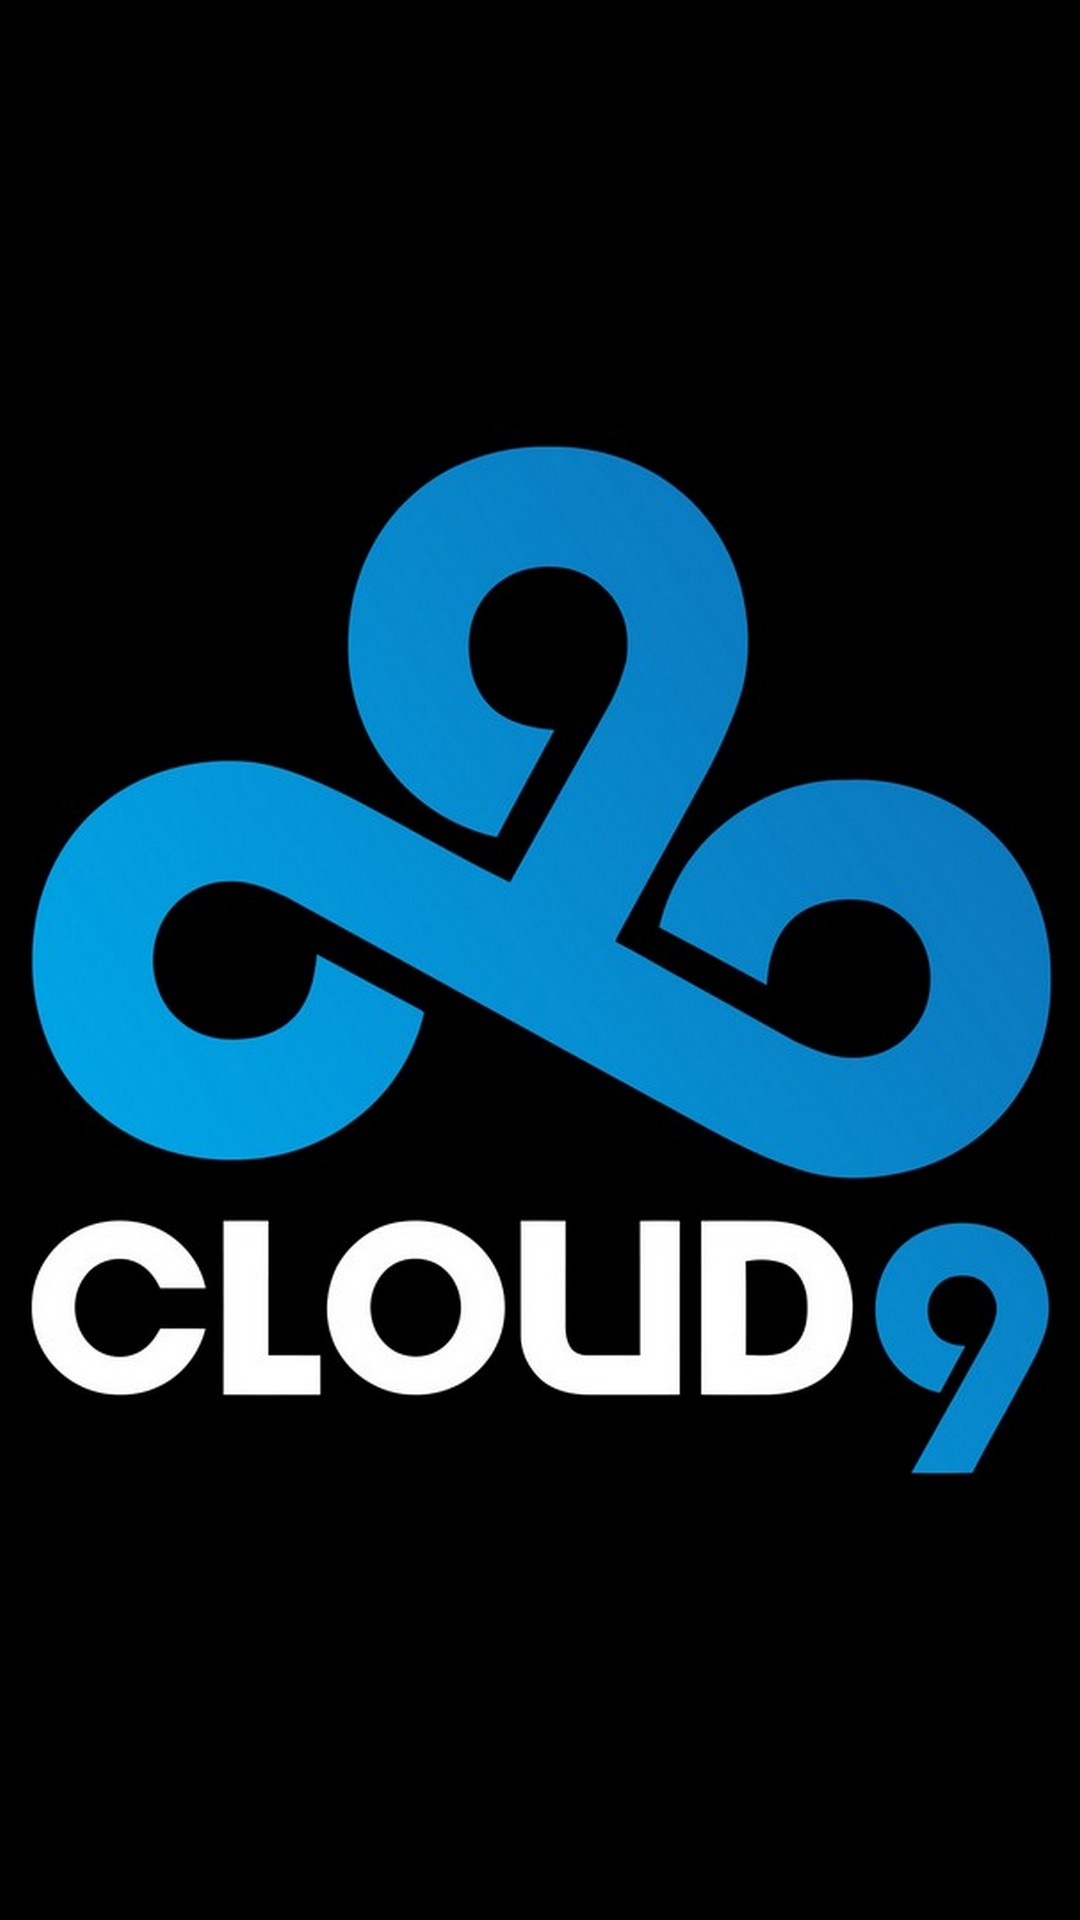 Cloud 9 Wallpaper Android